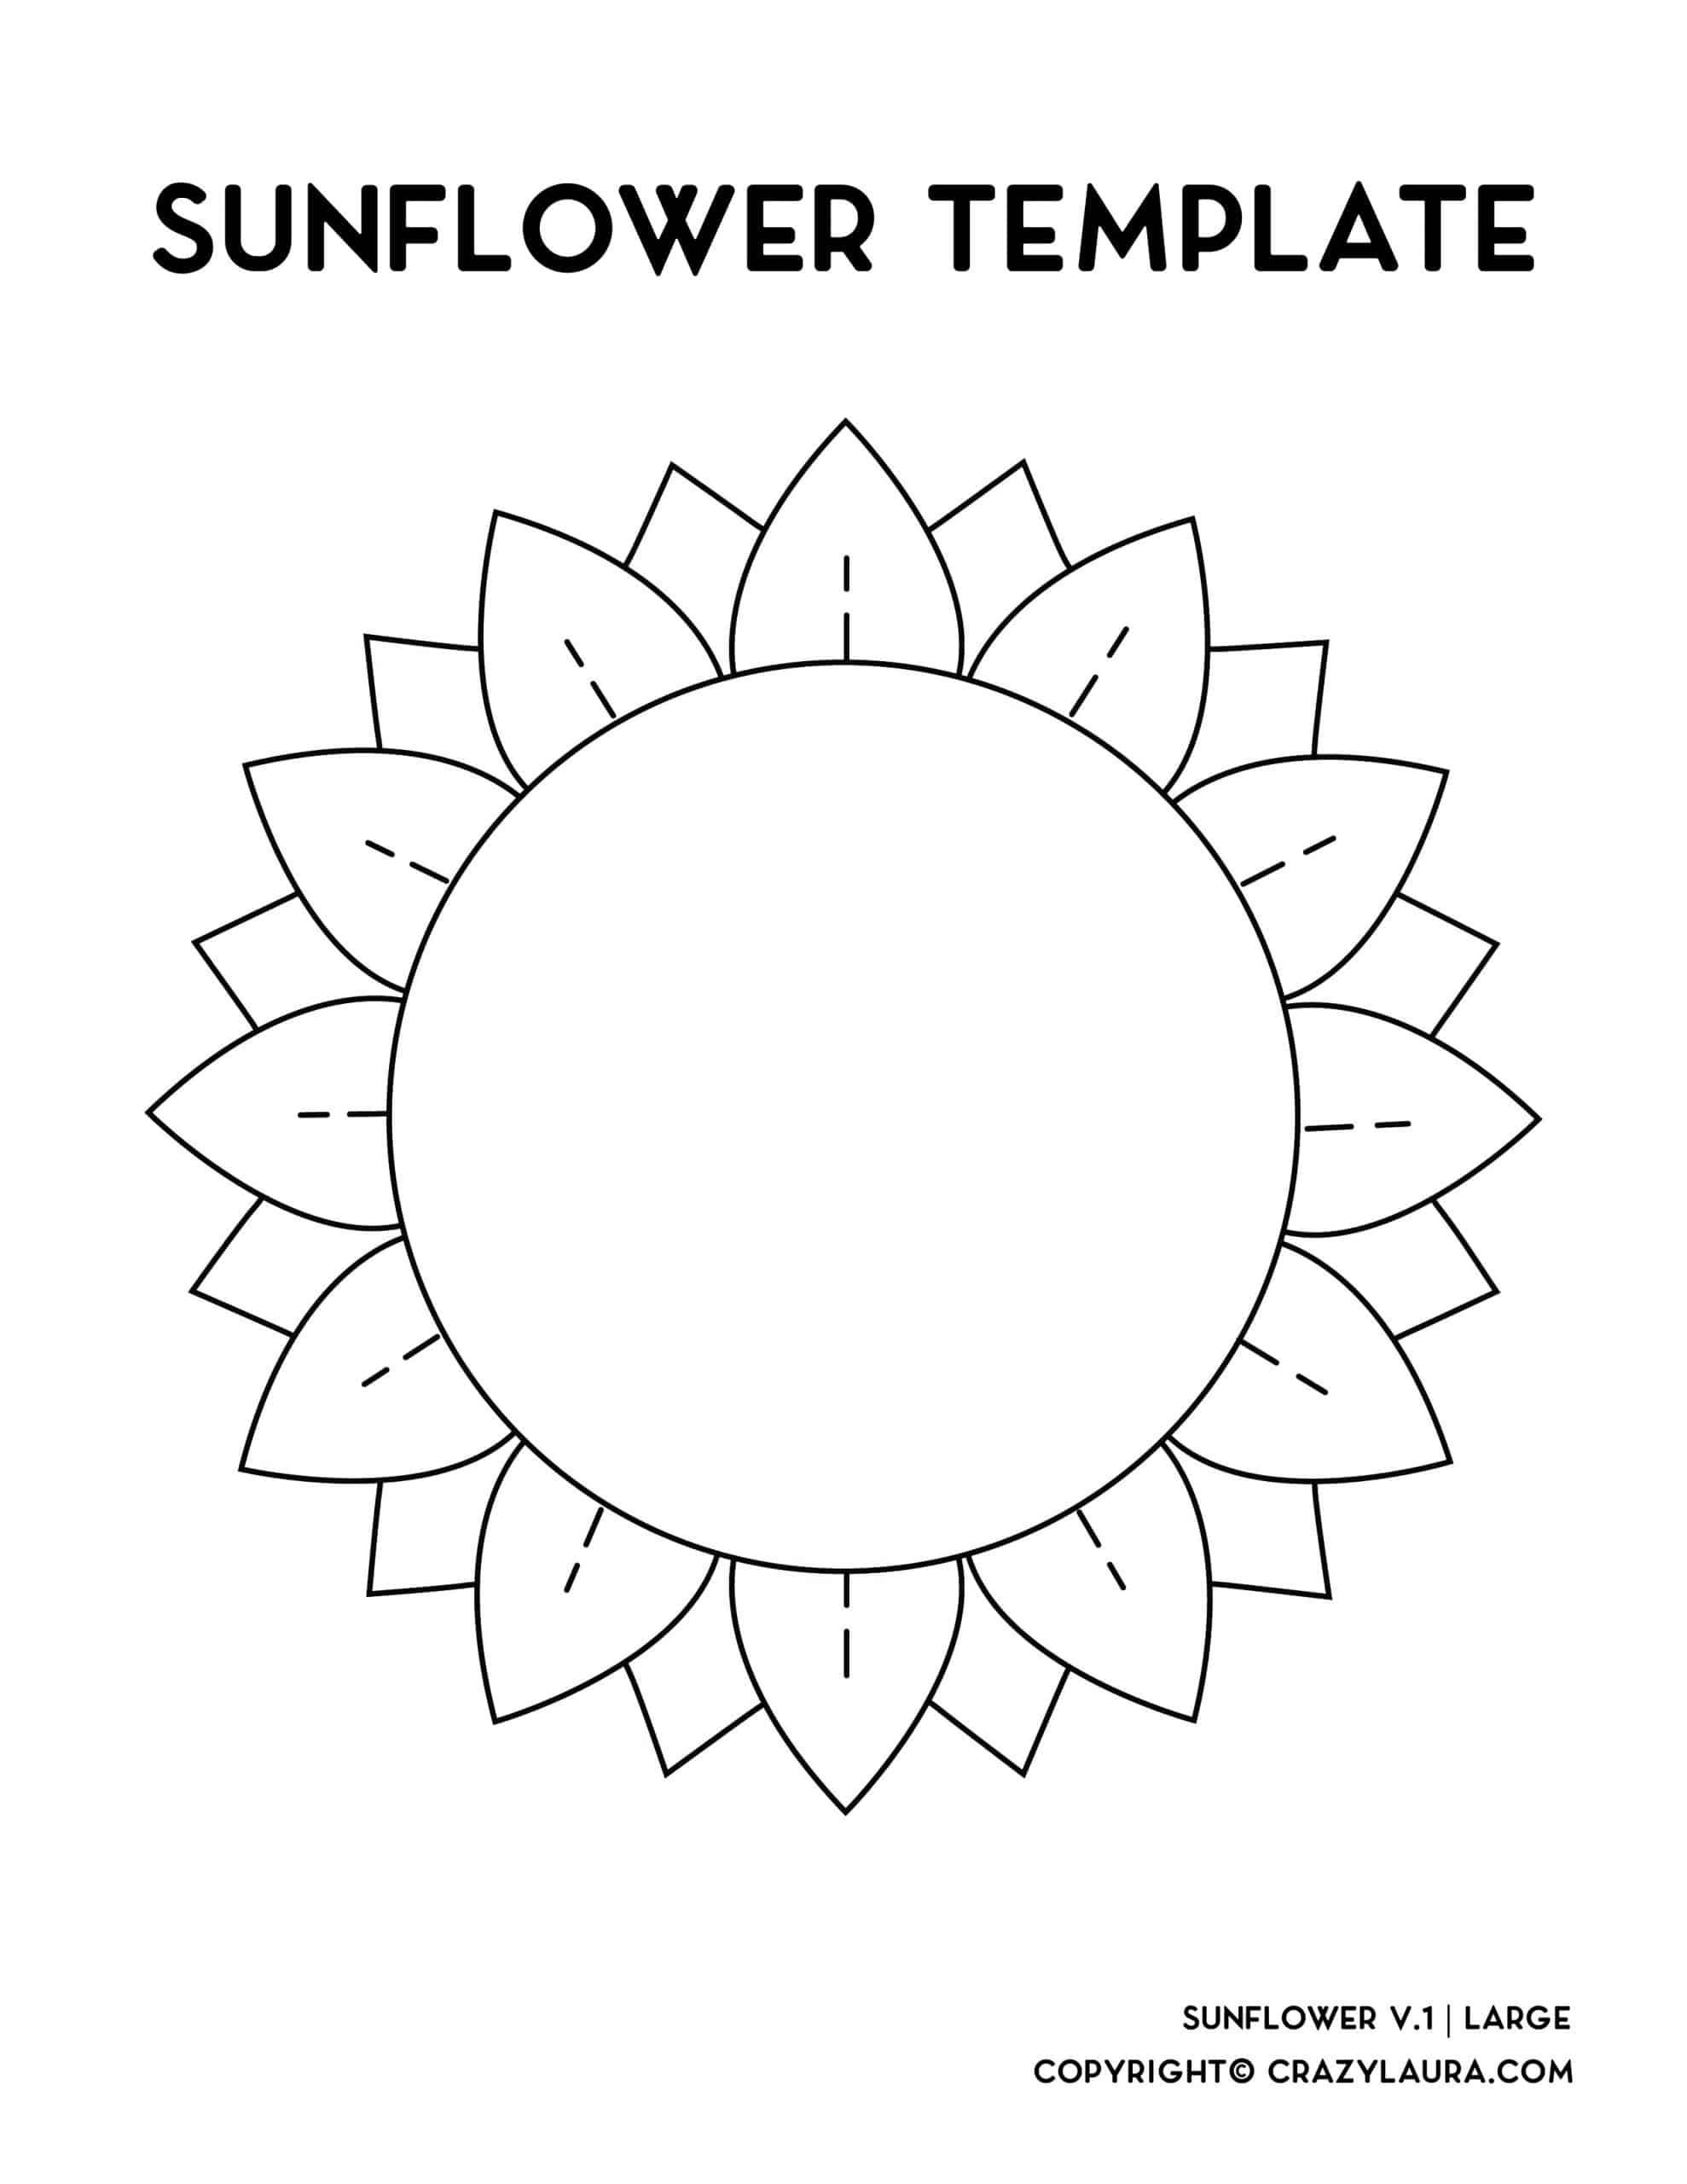 Free Sunflower Template Stencil Outlines Sunflower Template Sunflower Stencil Free Stencils